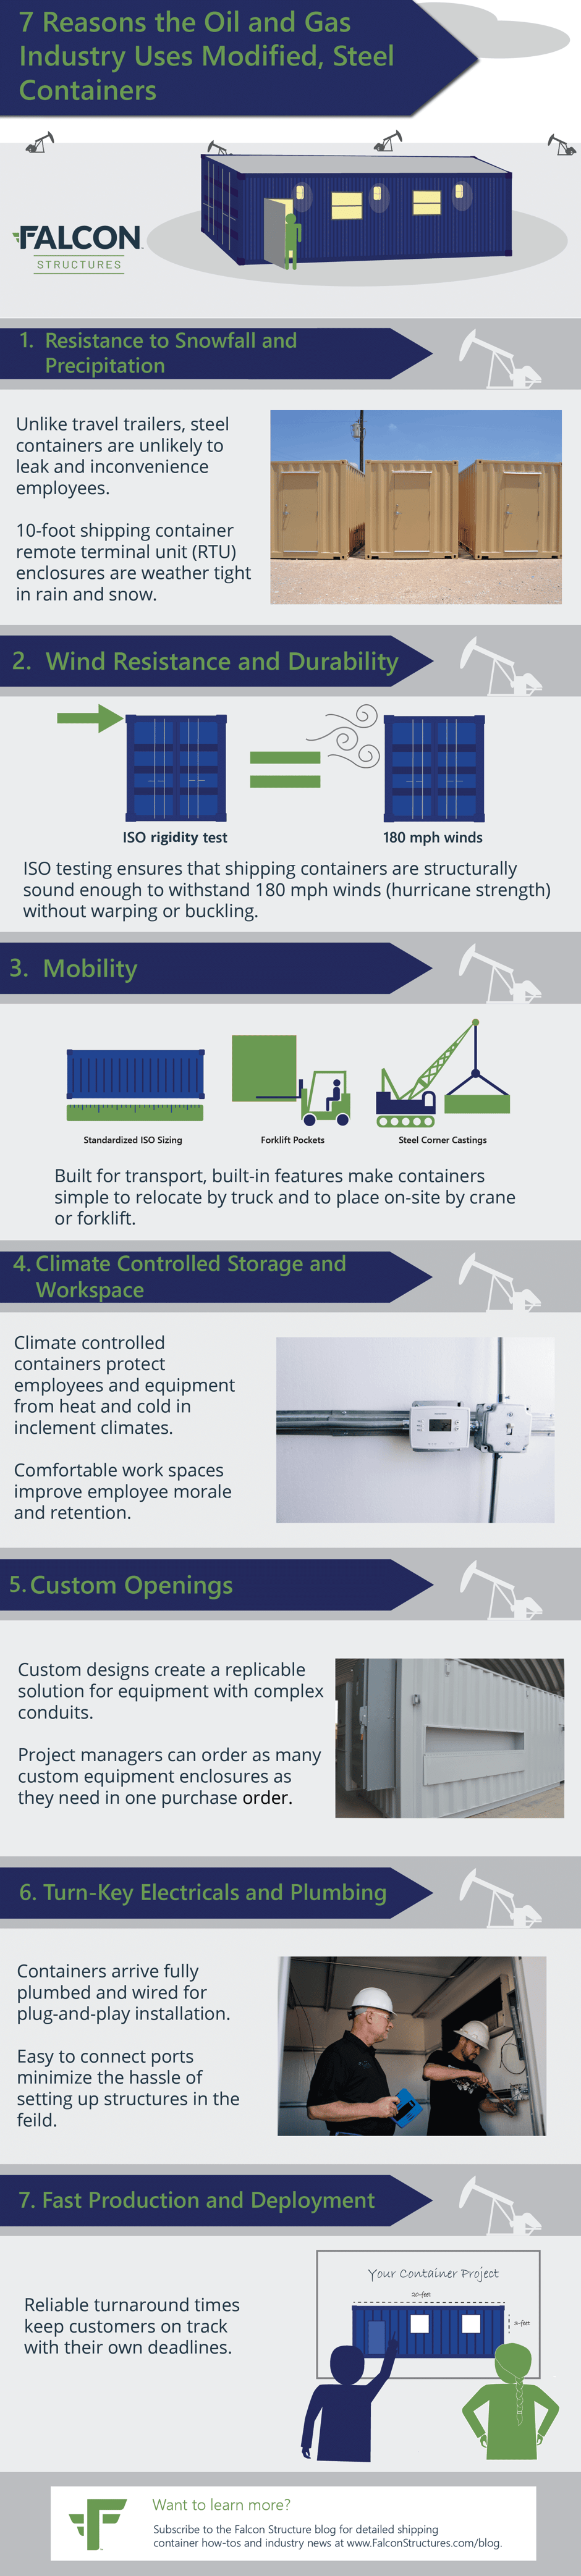 oil and gas industry uses shipping containers infographic